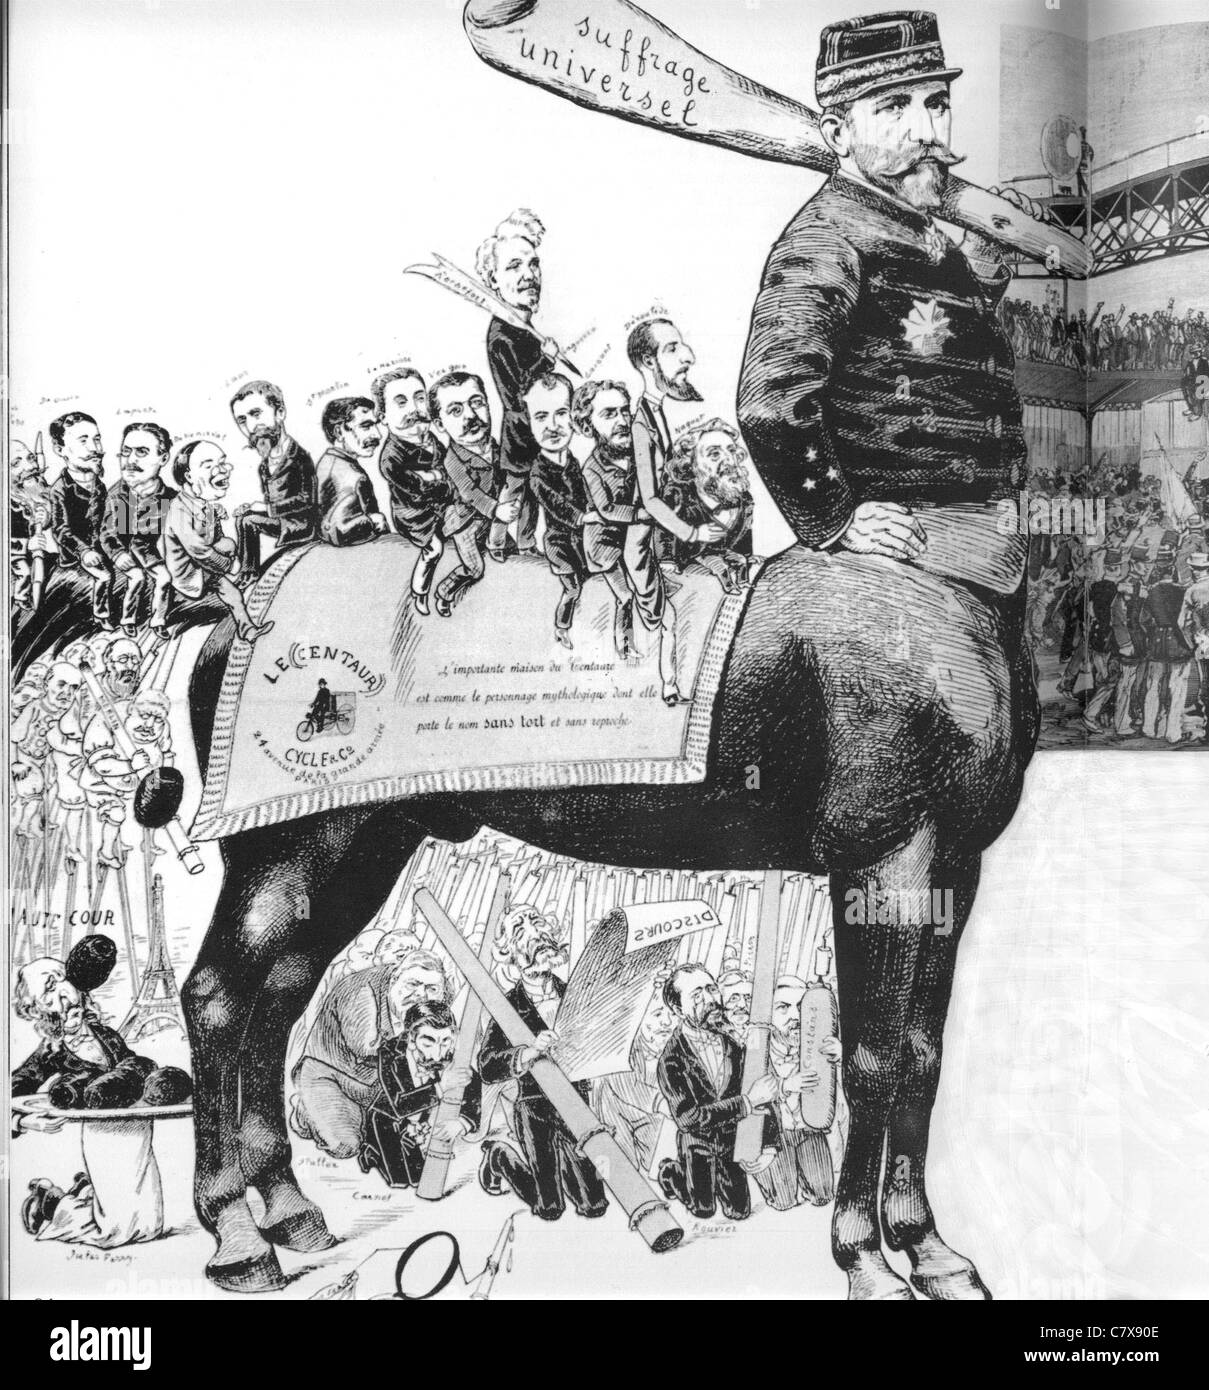 GEORGES ERNEST BOULANGER (1837-1891) French general and politician here satirised as a Centaur - see Description below Stock Photo